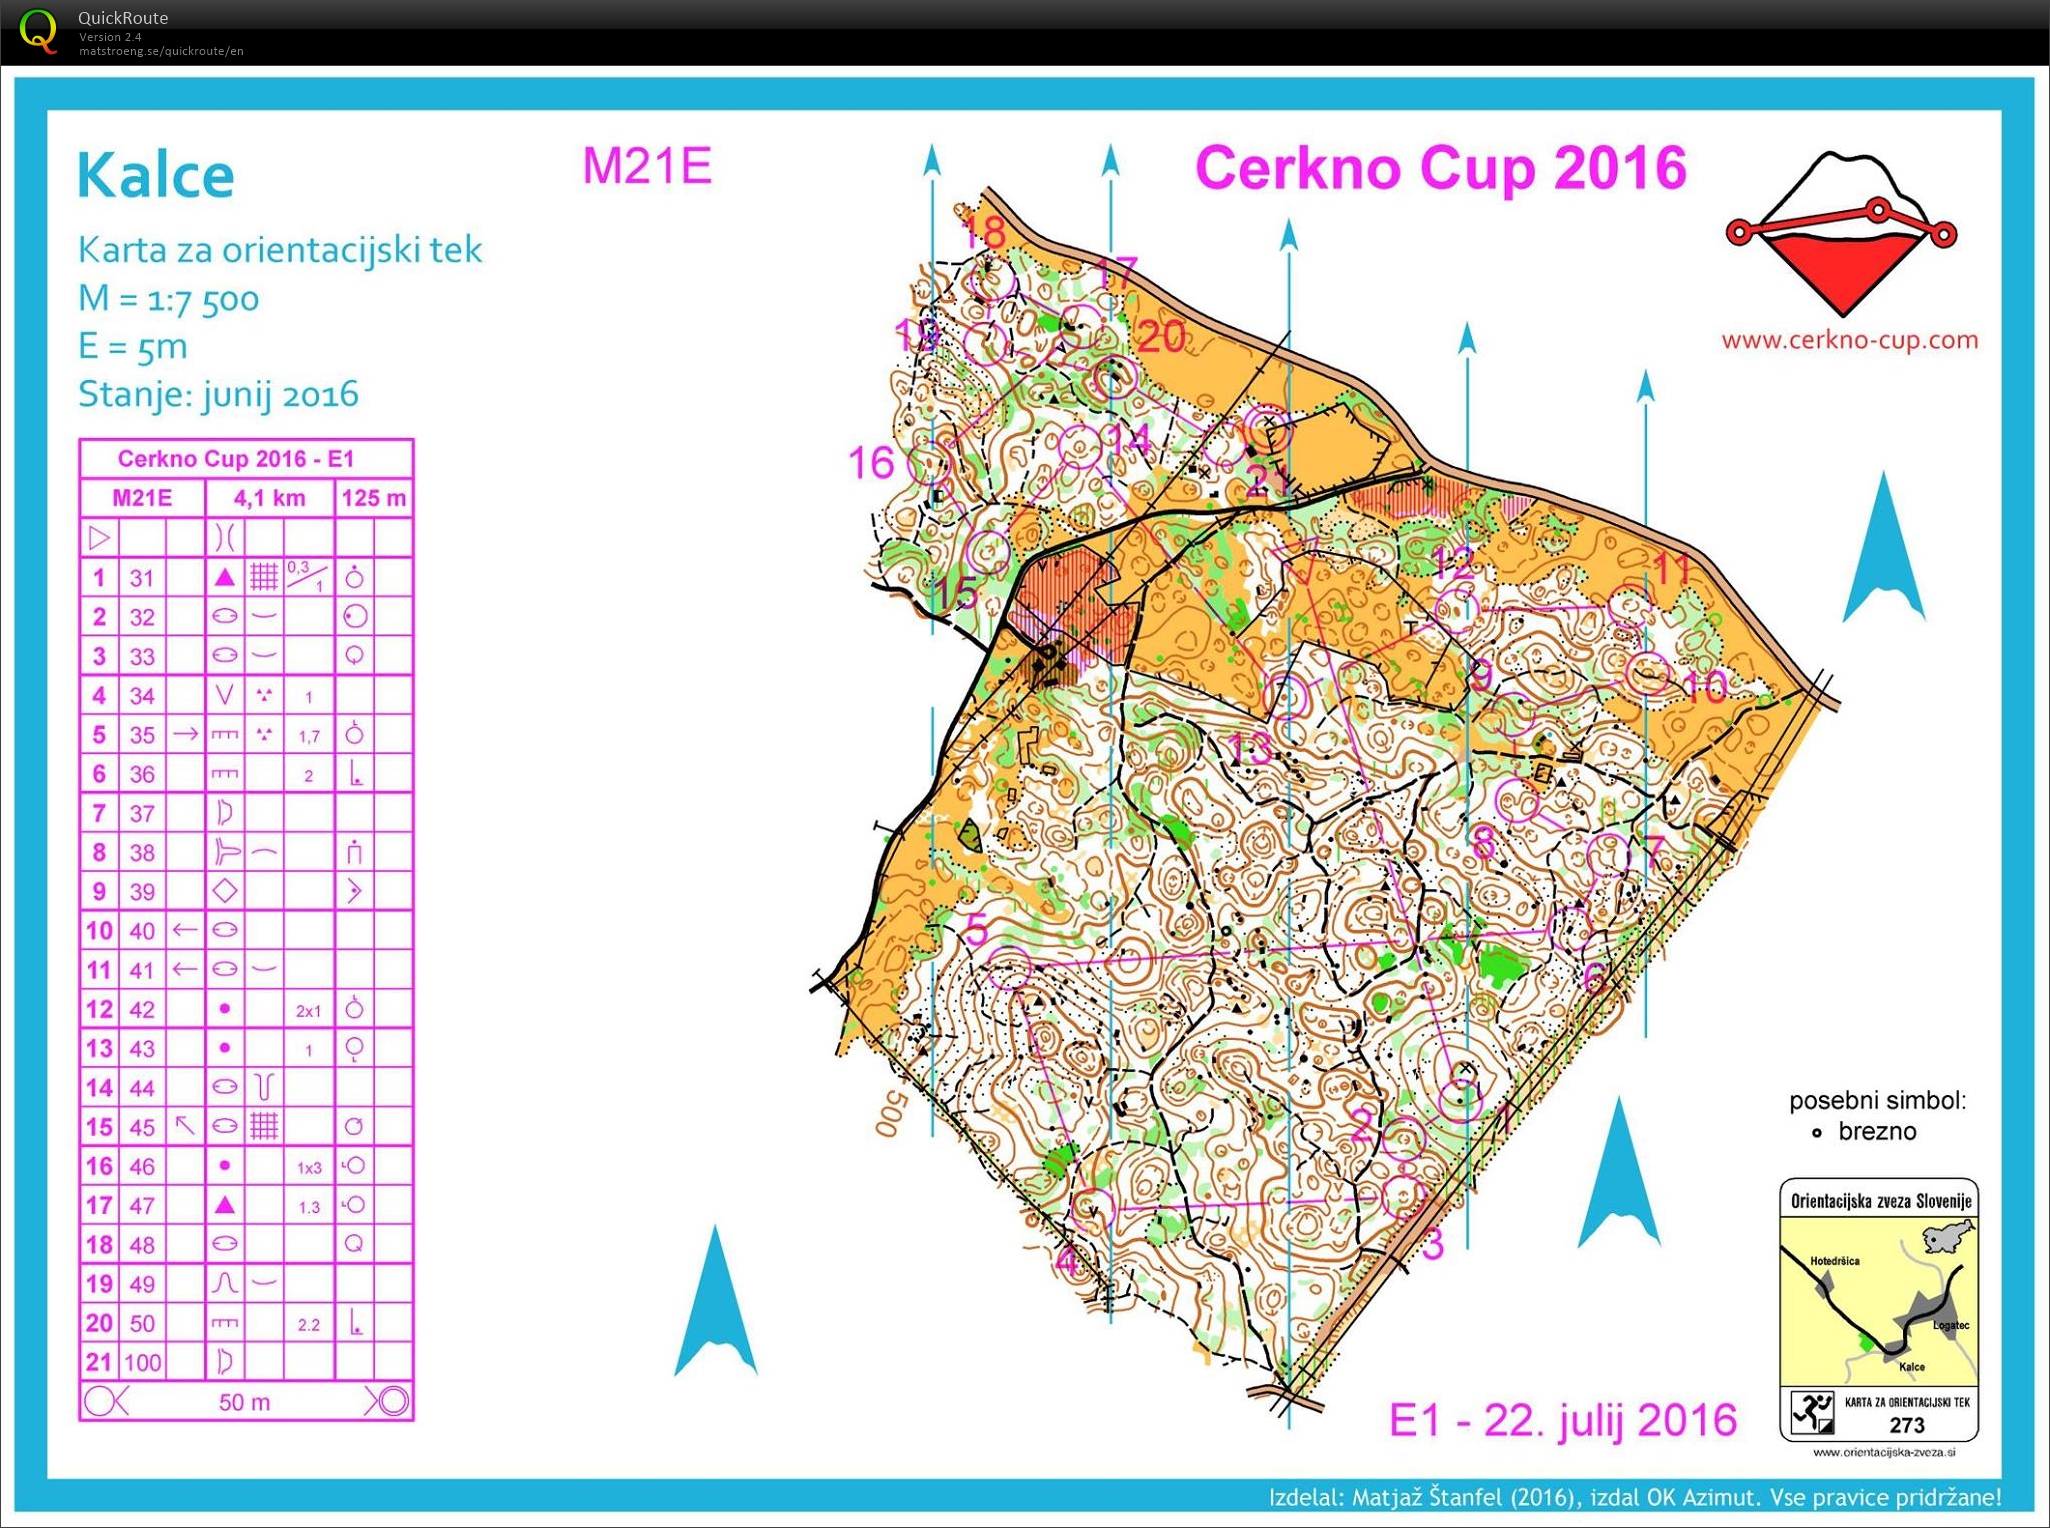 Cerkno Cup stage 1 (22.07.2016)